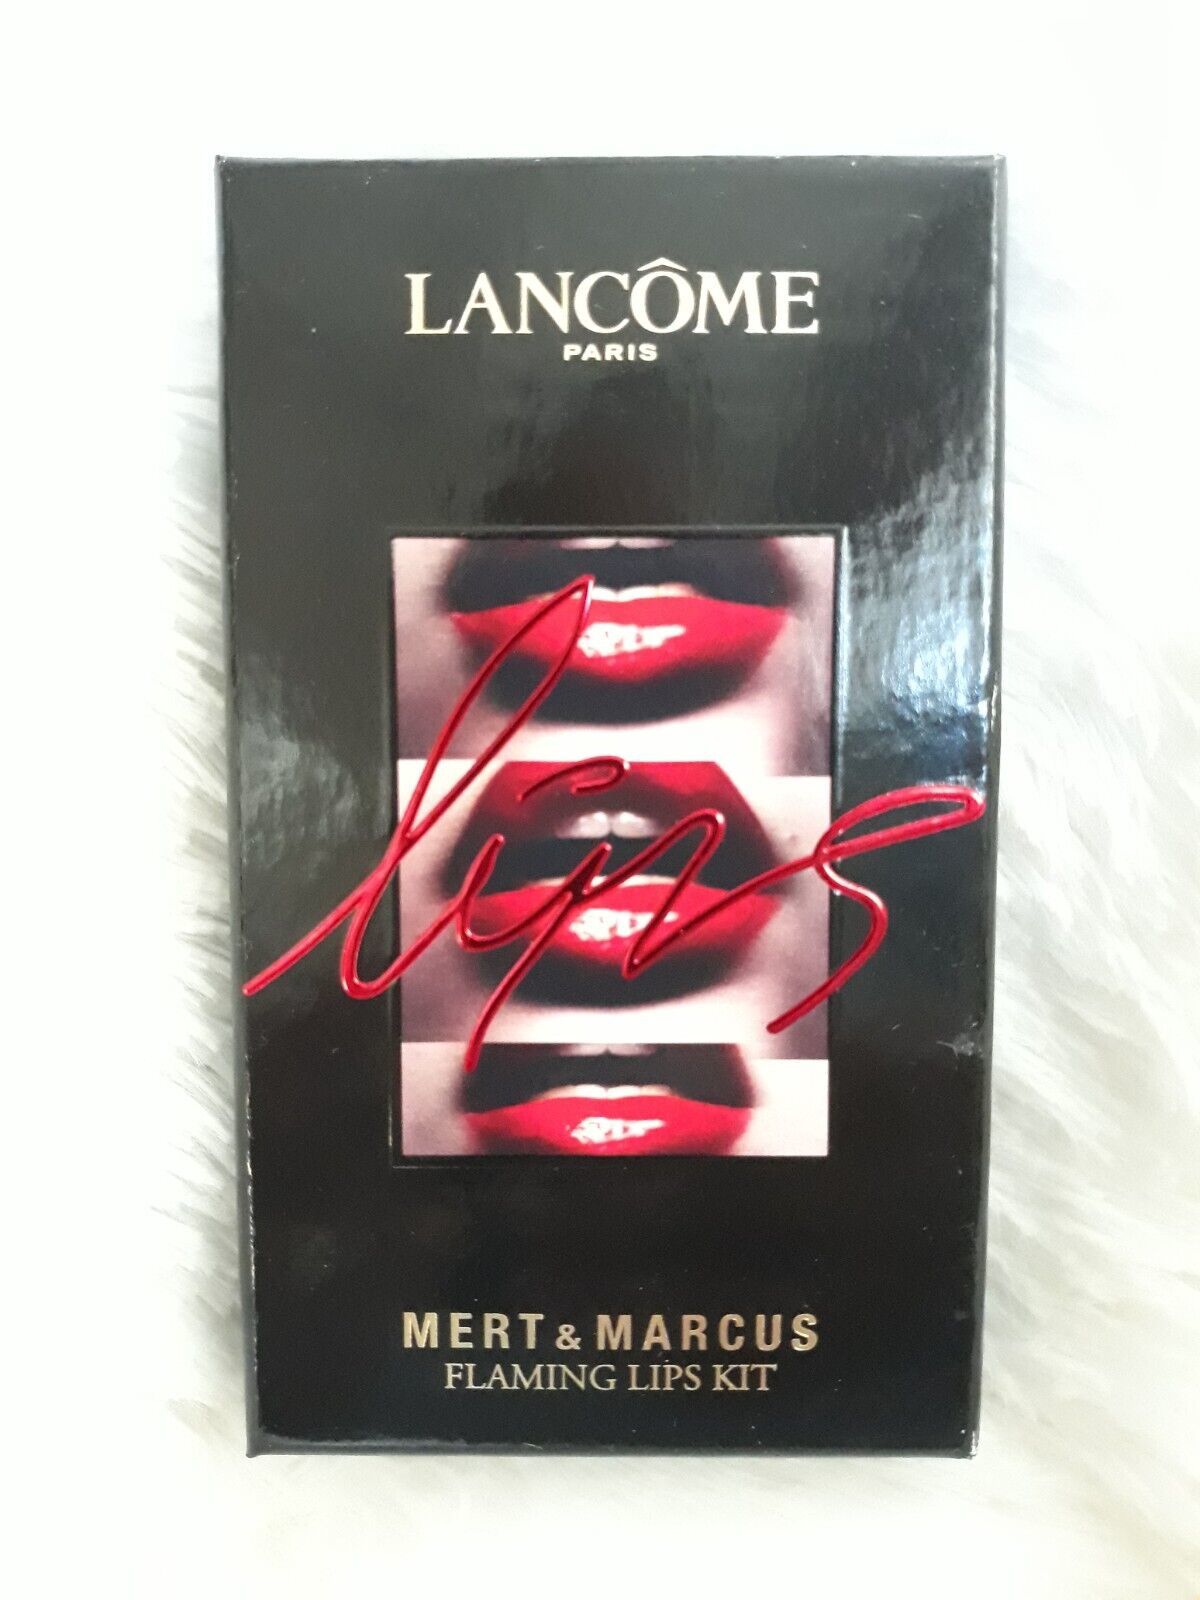 LANCOME Limited Edition MERT & MARCUS Flaming Lips Kit #02 VIOLET/PURPLE ~SEALED - $26.00